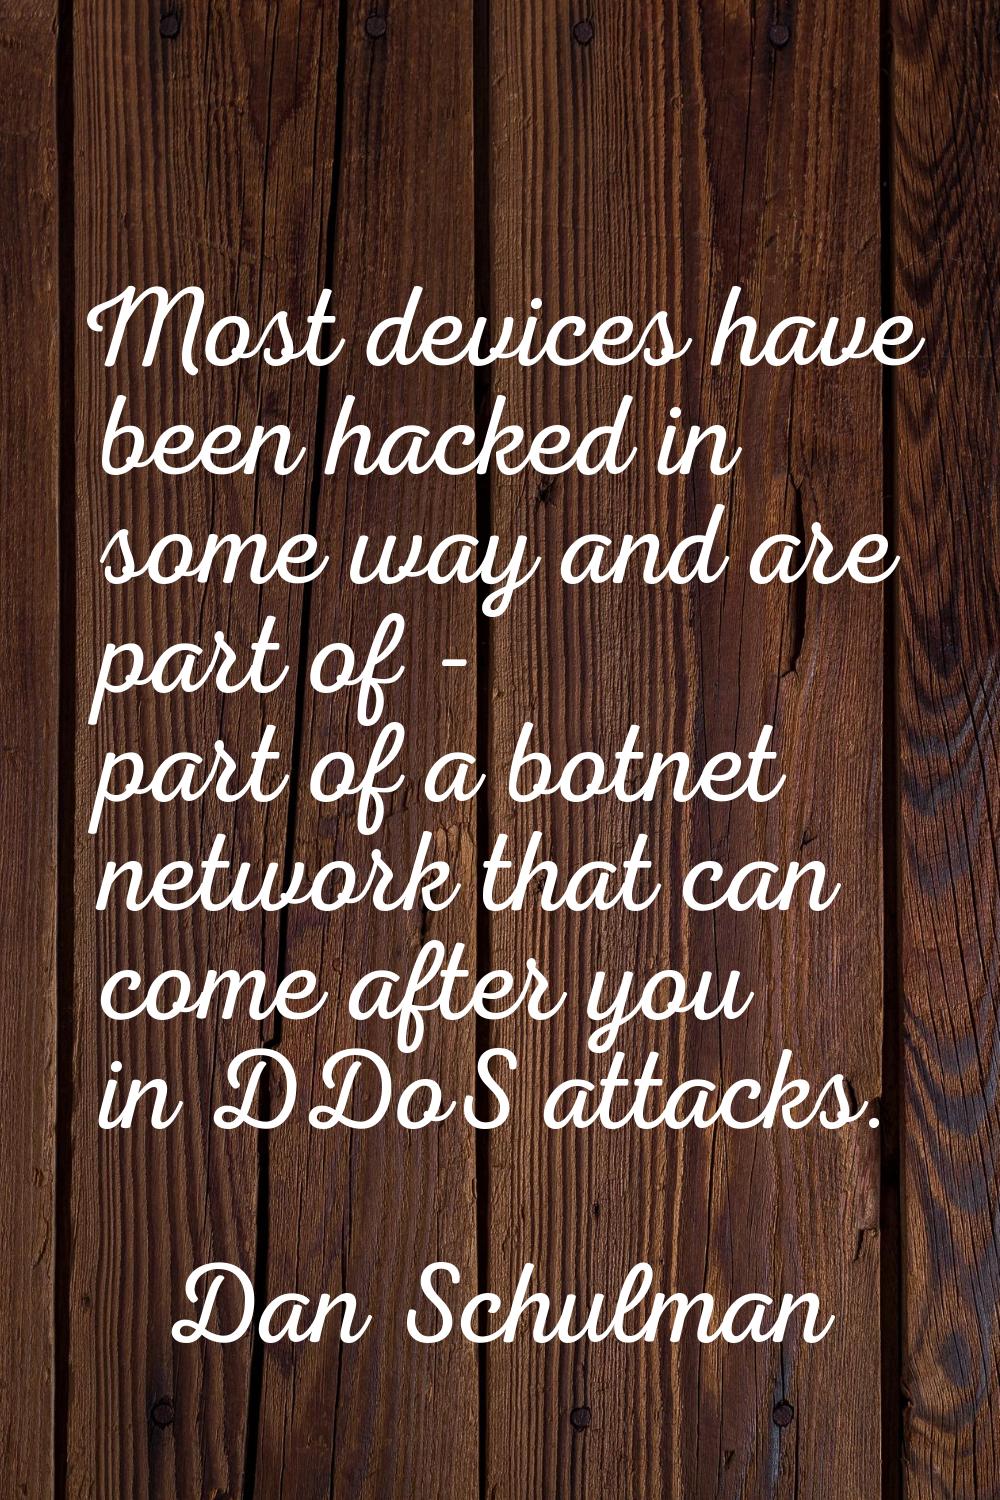 Most devices have been hacked in some way and are part of - part of a botnet network that can come 